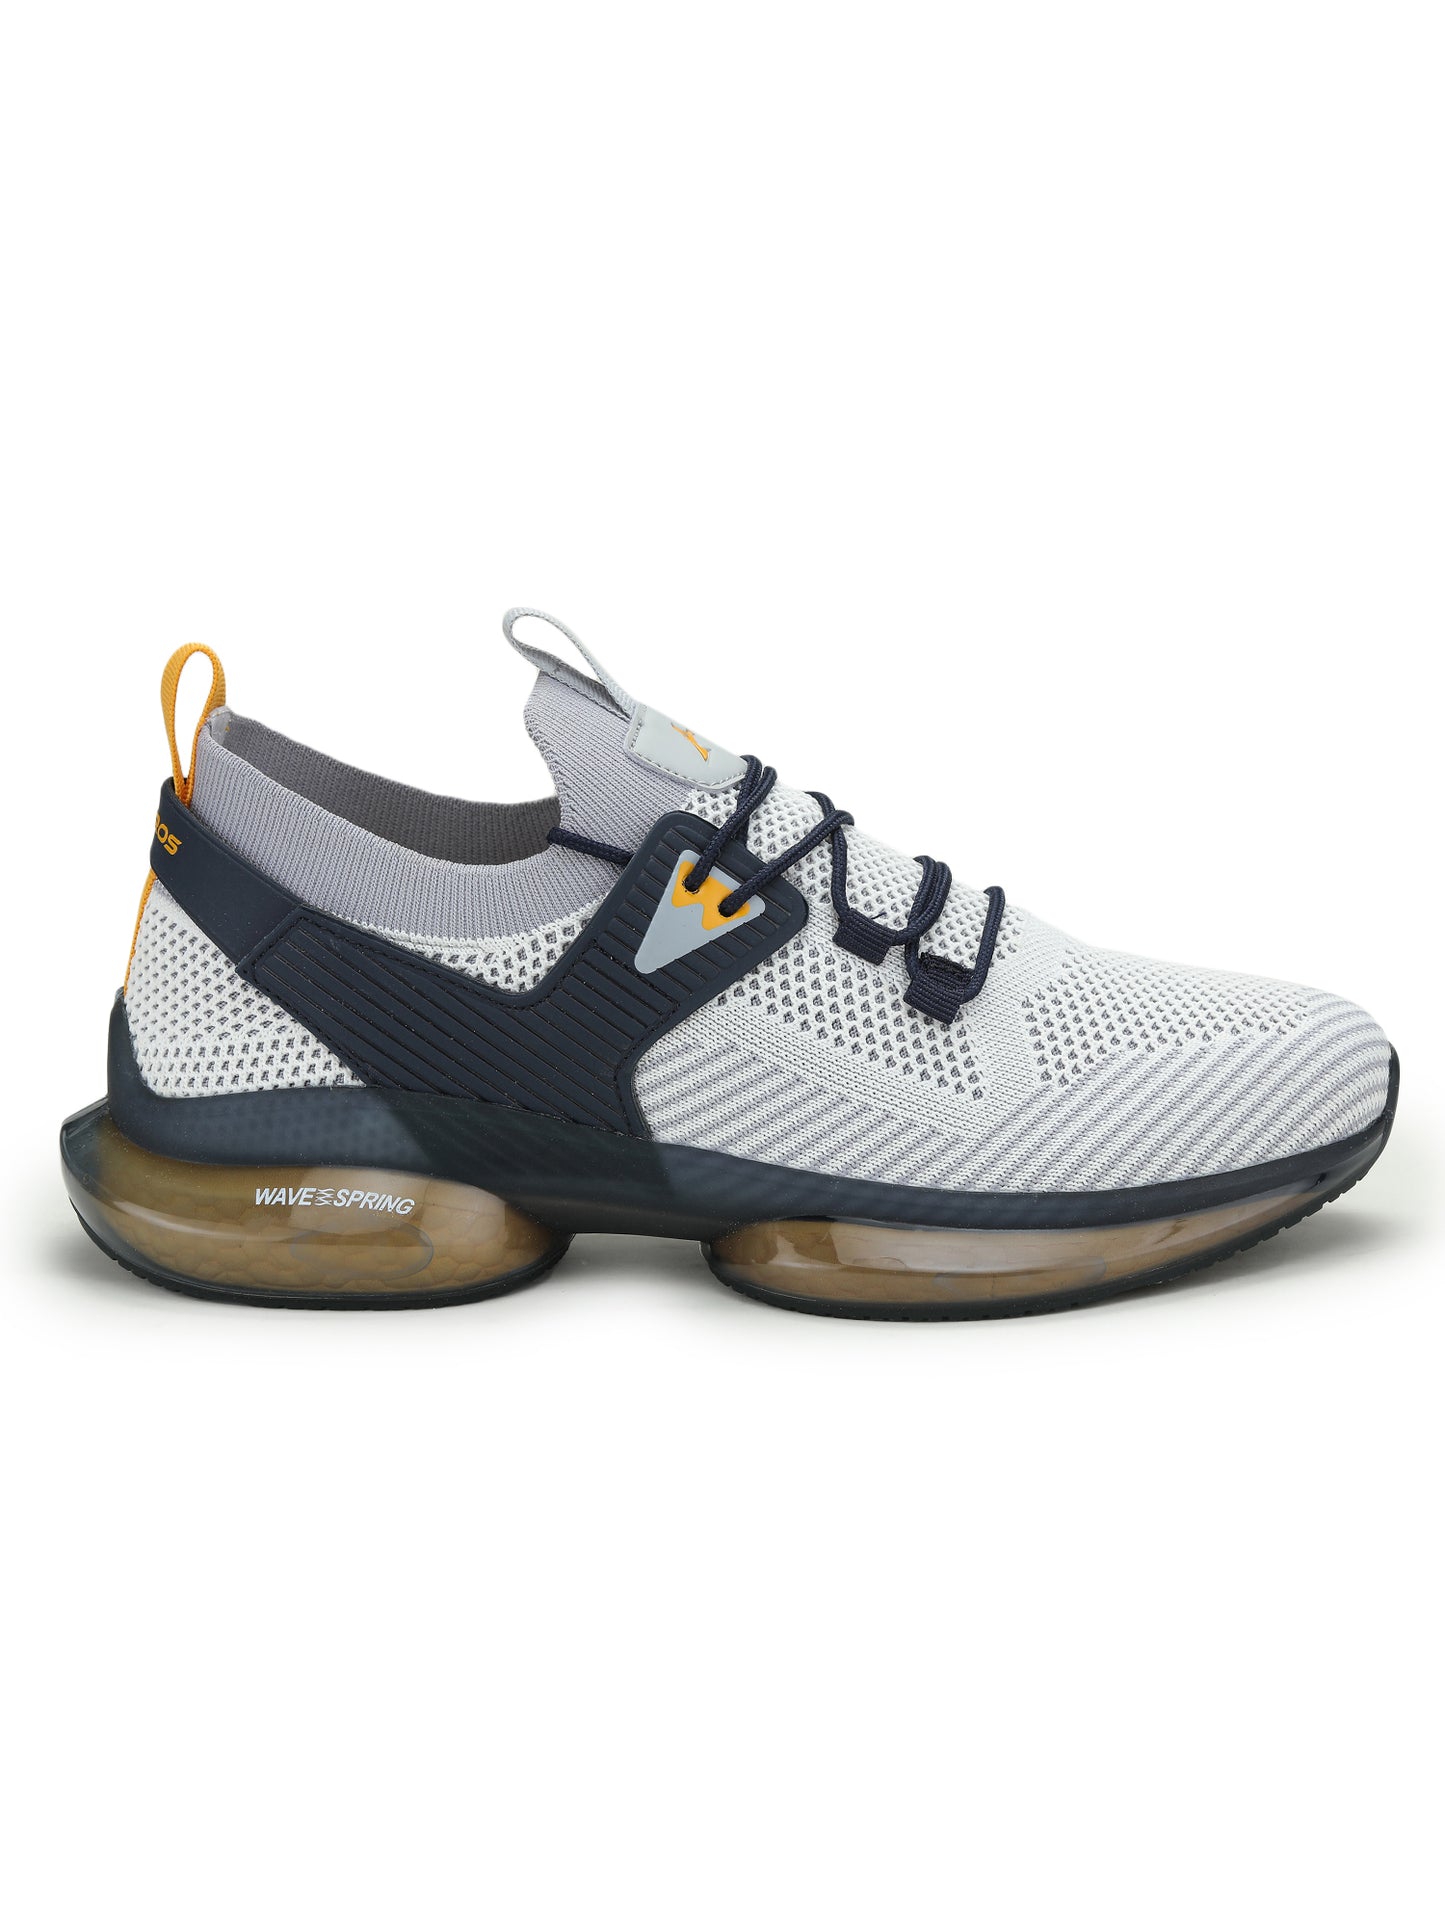 ABROS BOSS Sports Shoes For Men's